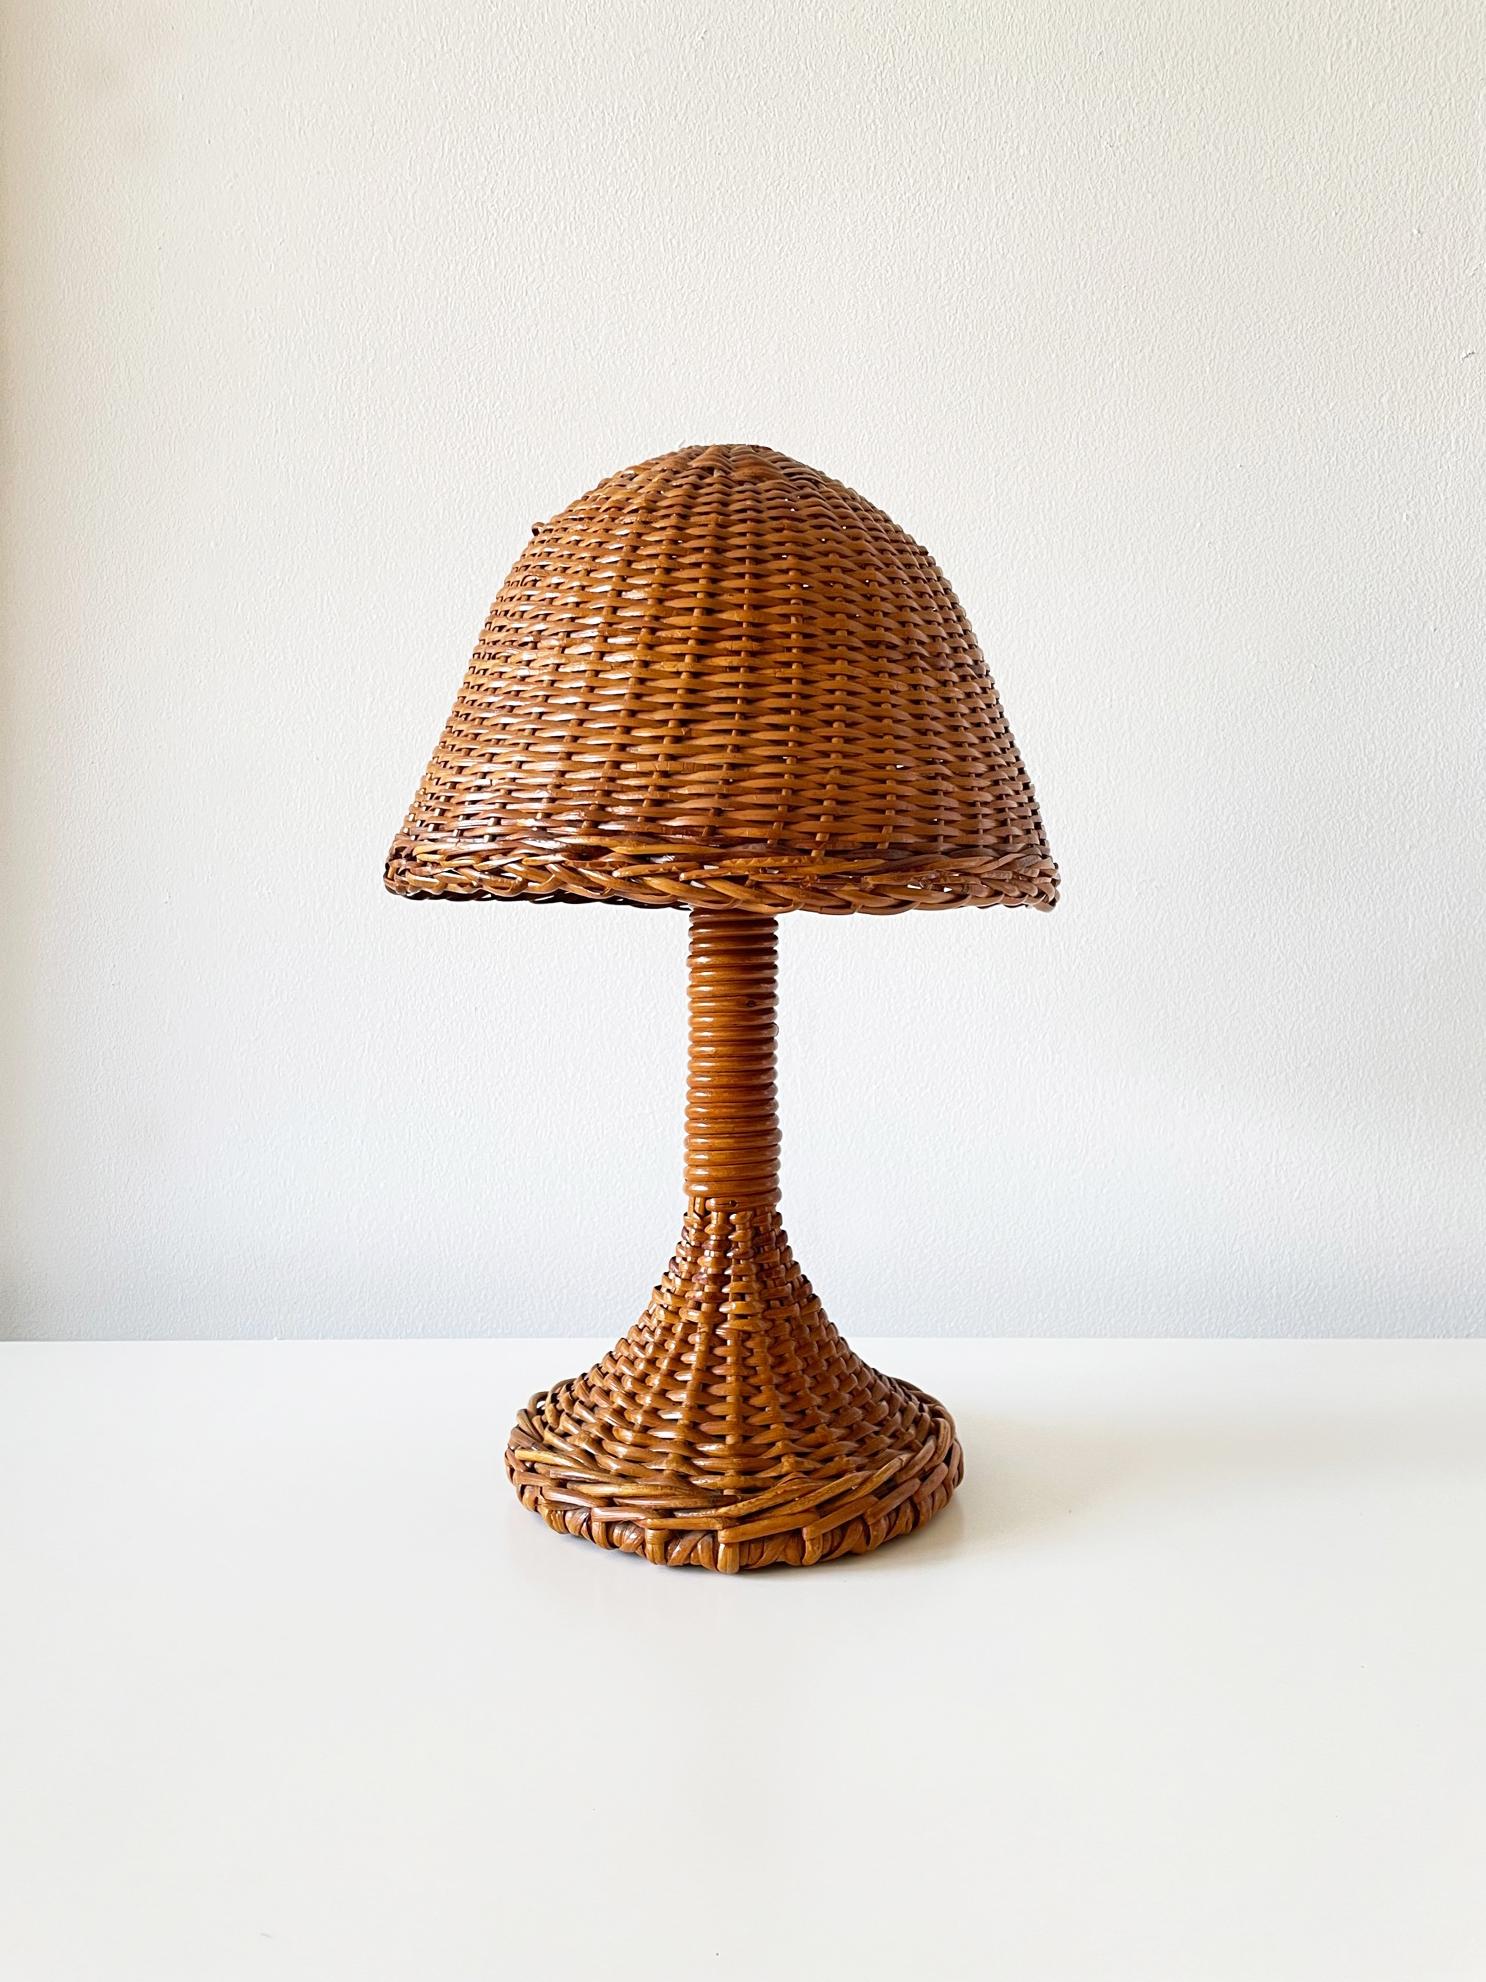 This charming Mushroom-shaped table lamp is handmade of tightly woven rattan in a rich chestnut color. This skillful form is simple, expressive and charming. It has a great patina. This lamp has been freshly rewired with an on/off toggle switch